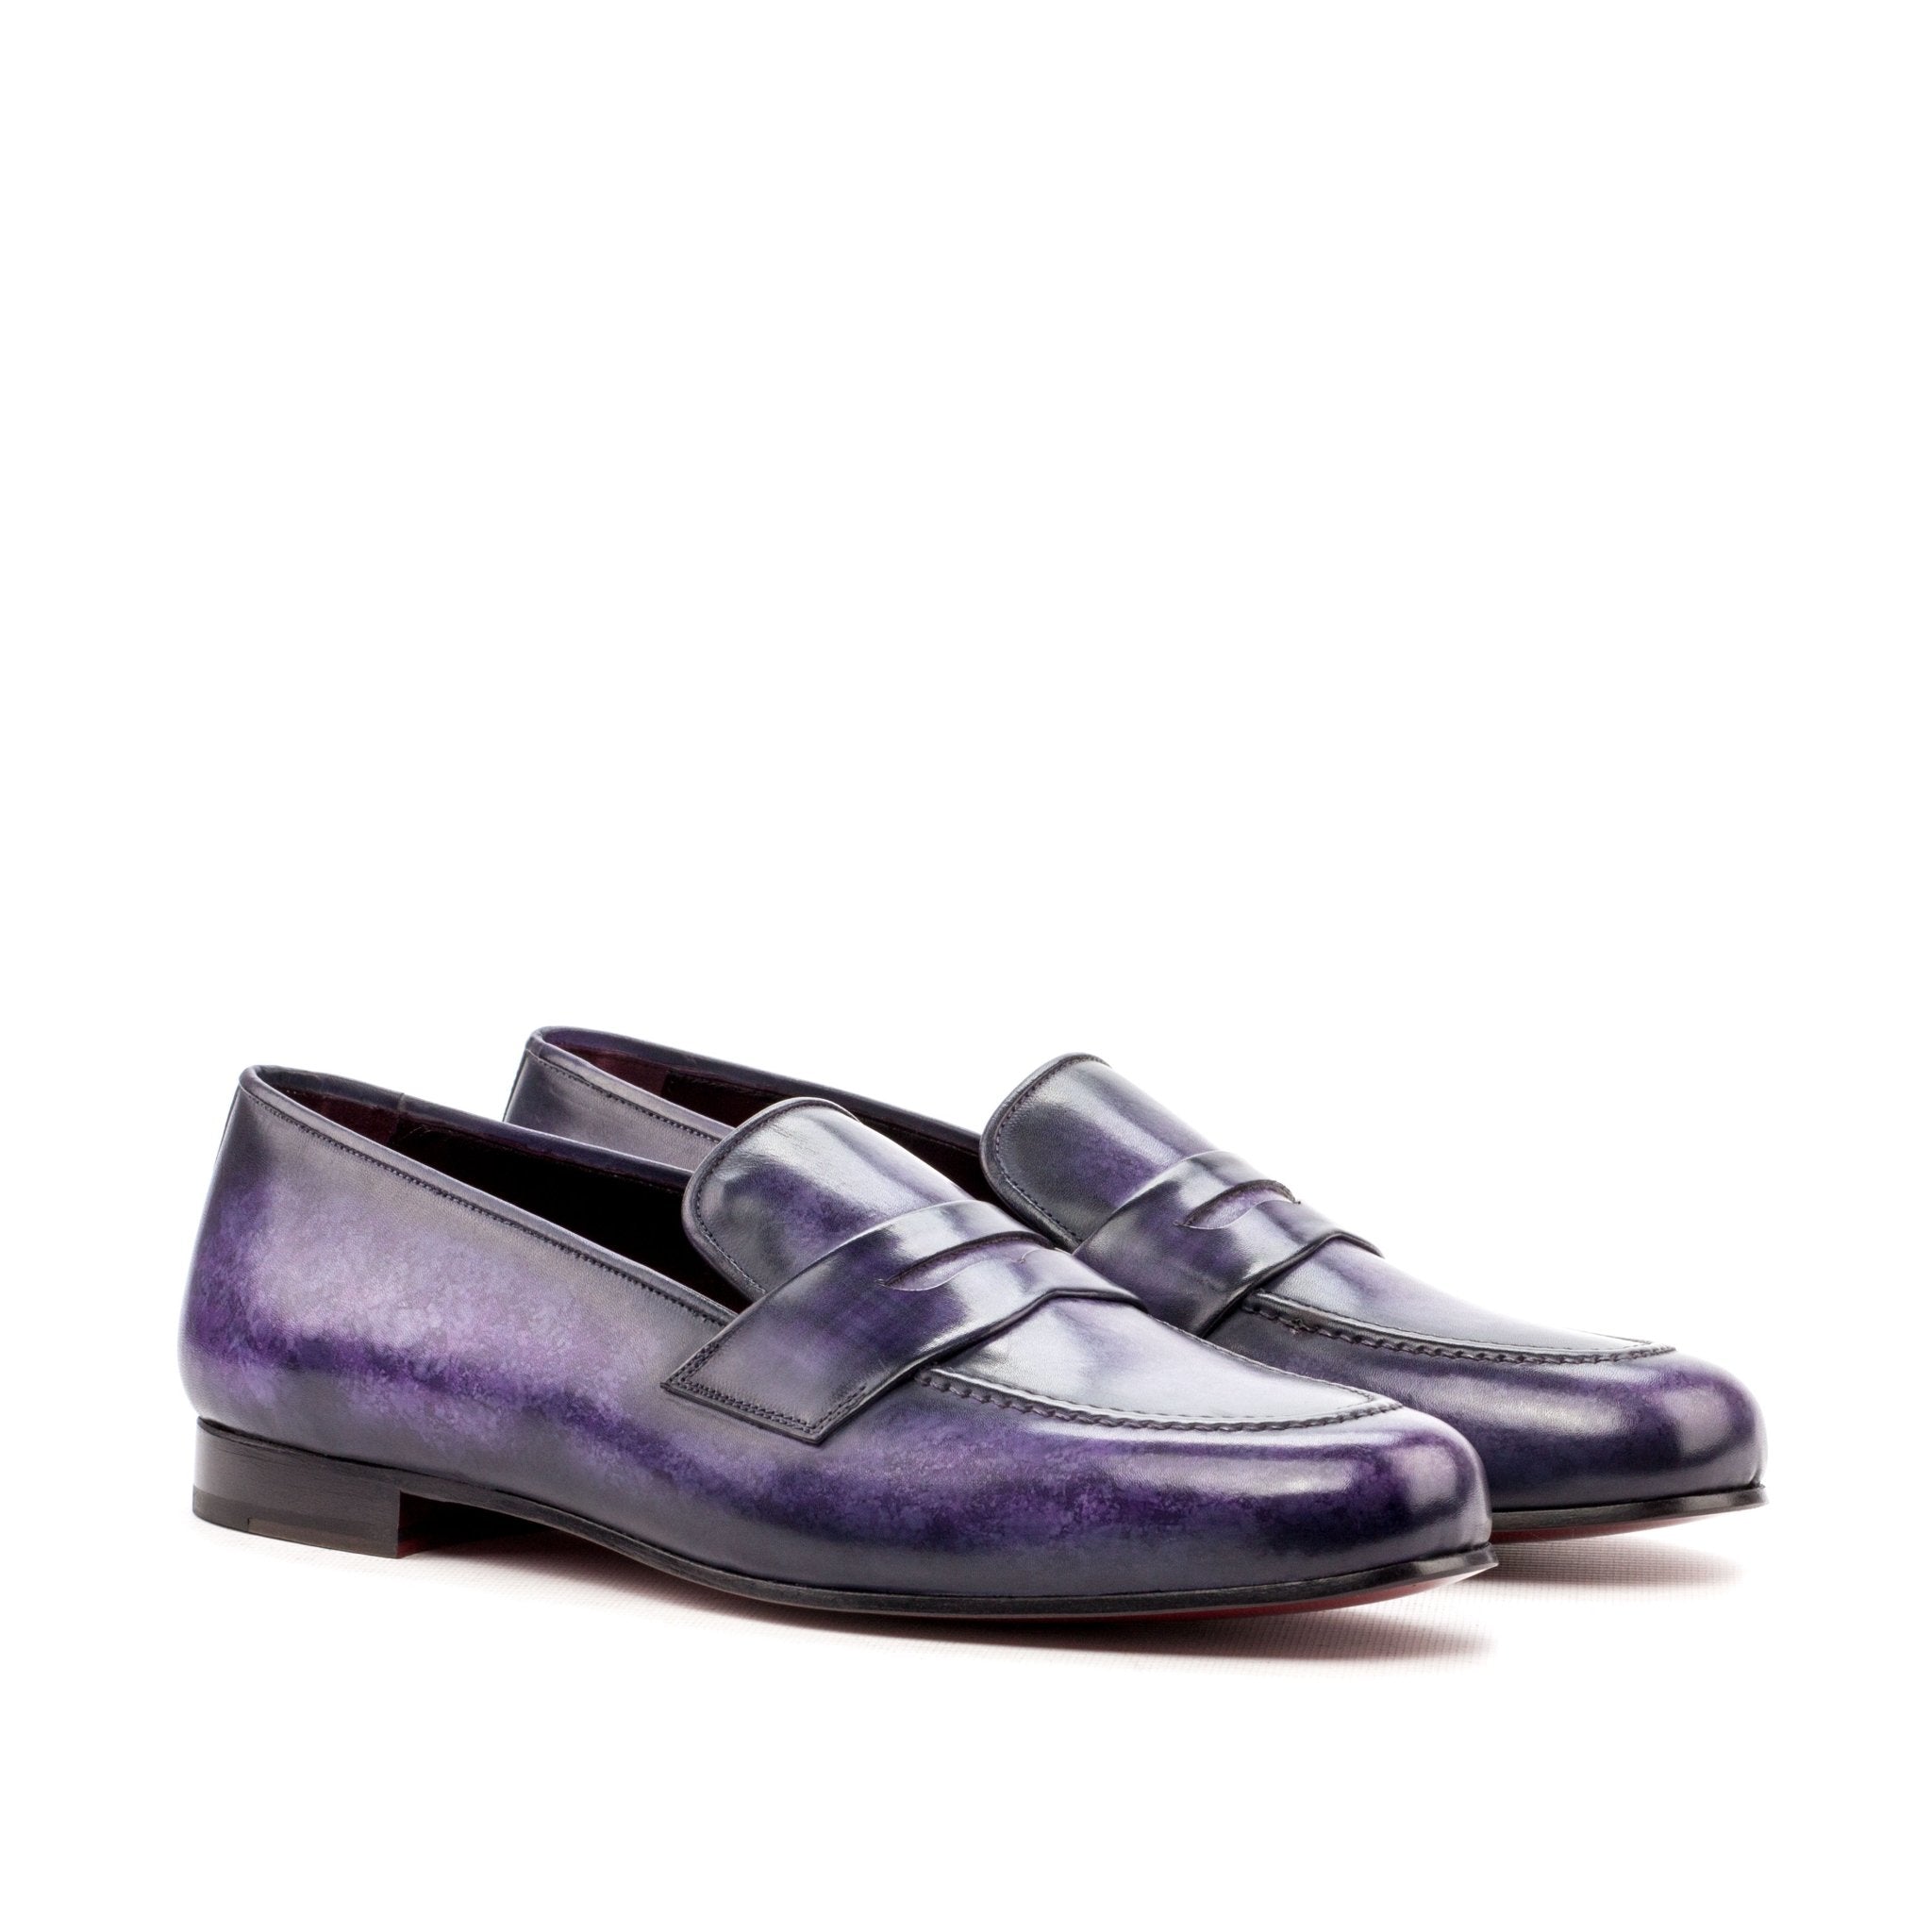 Men's Purple Patina Smoking Slippers with Red Bottom - Maison Kingsley Couture Spain